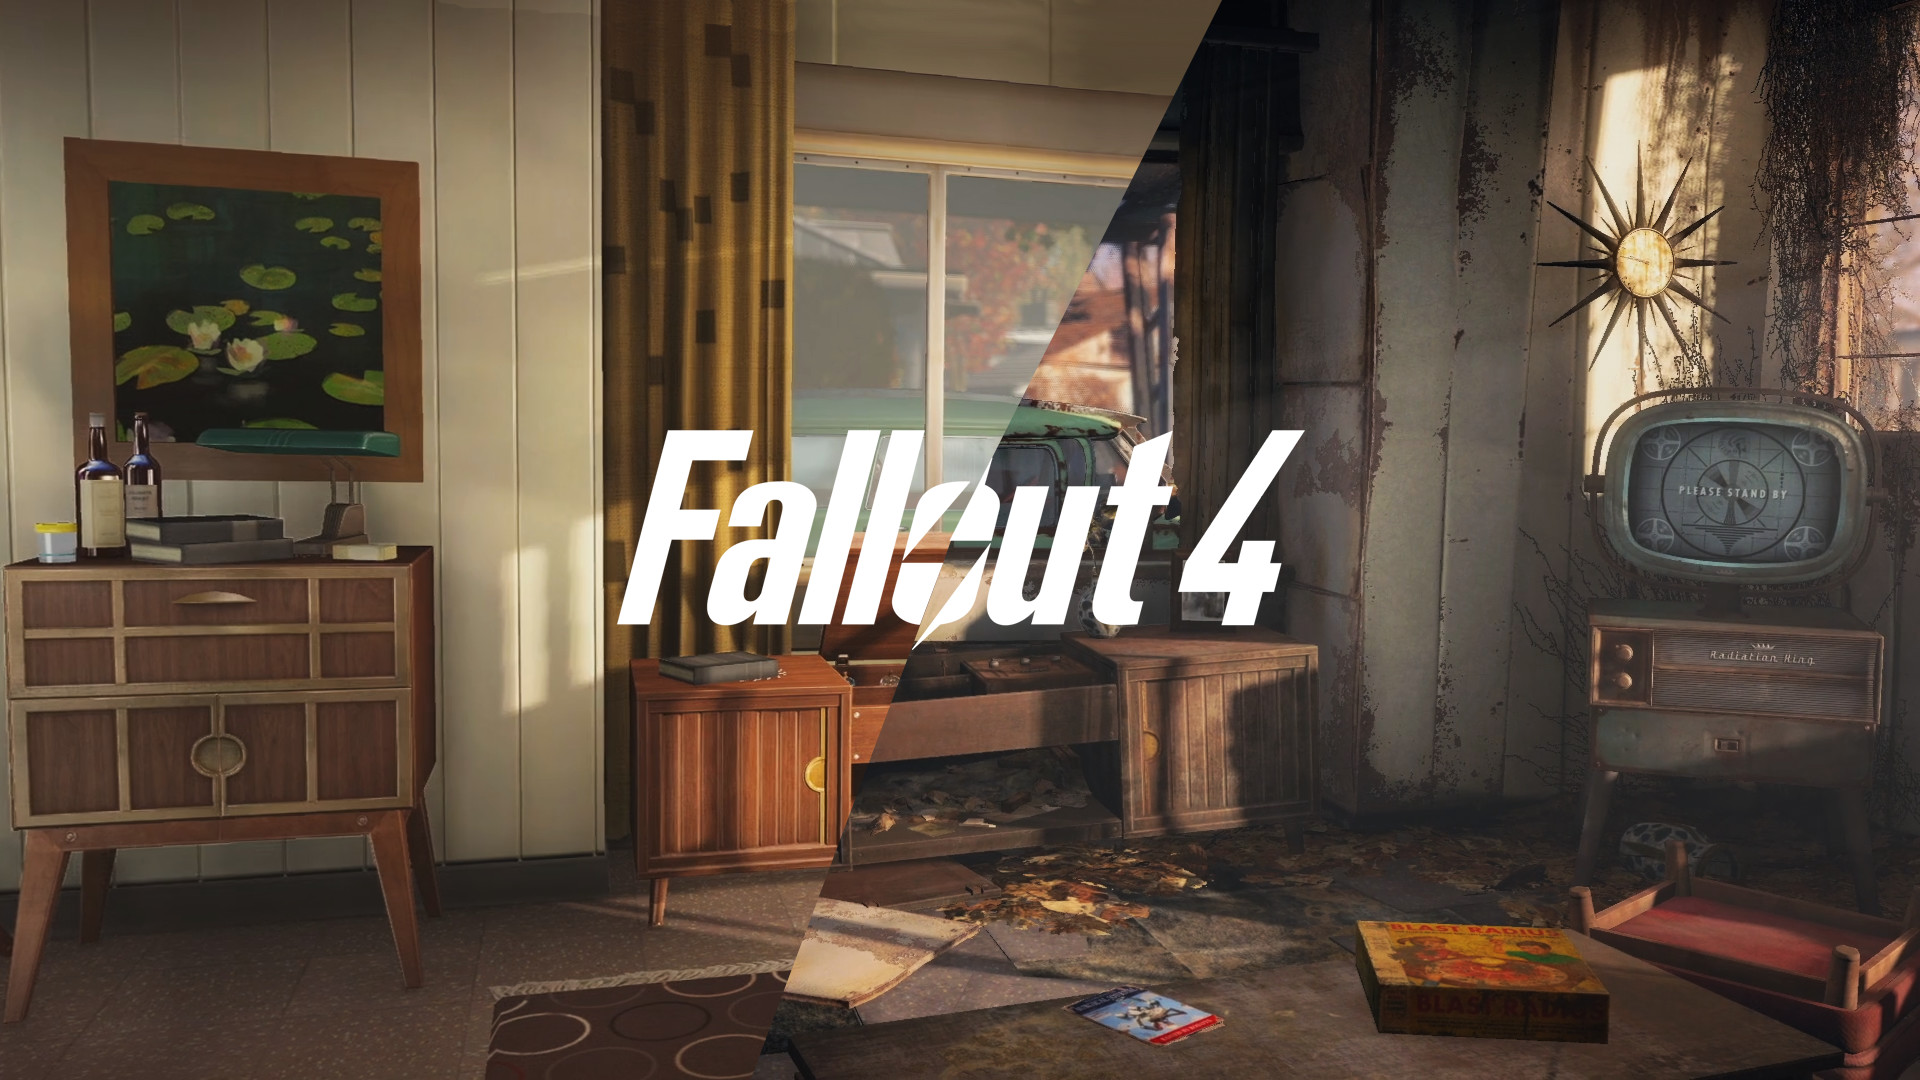 1920x1080 2016 4K Fallout 4 HDQ Wallpapers | NMgnCP